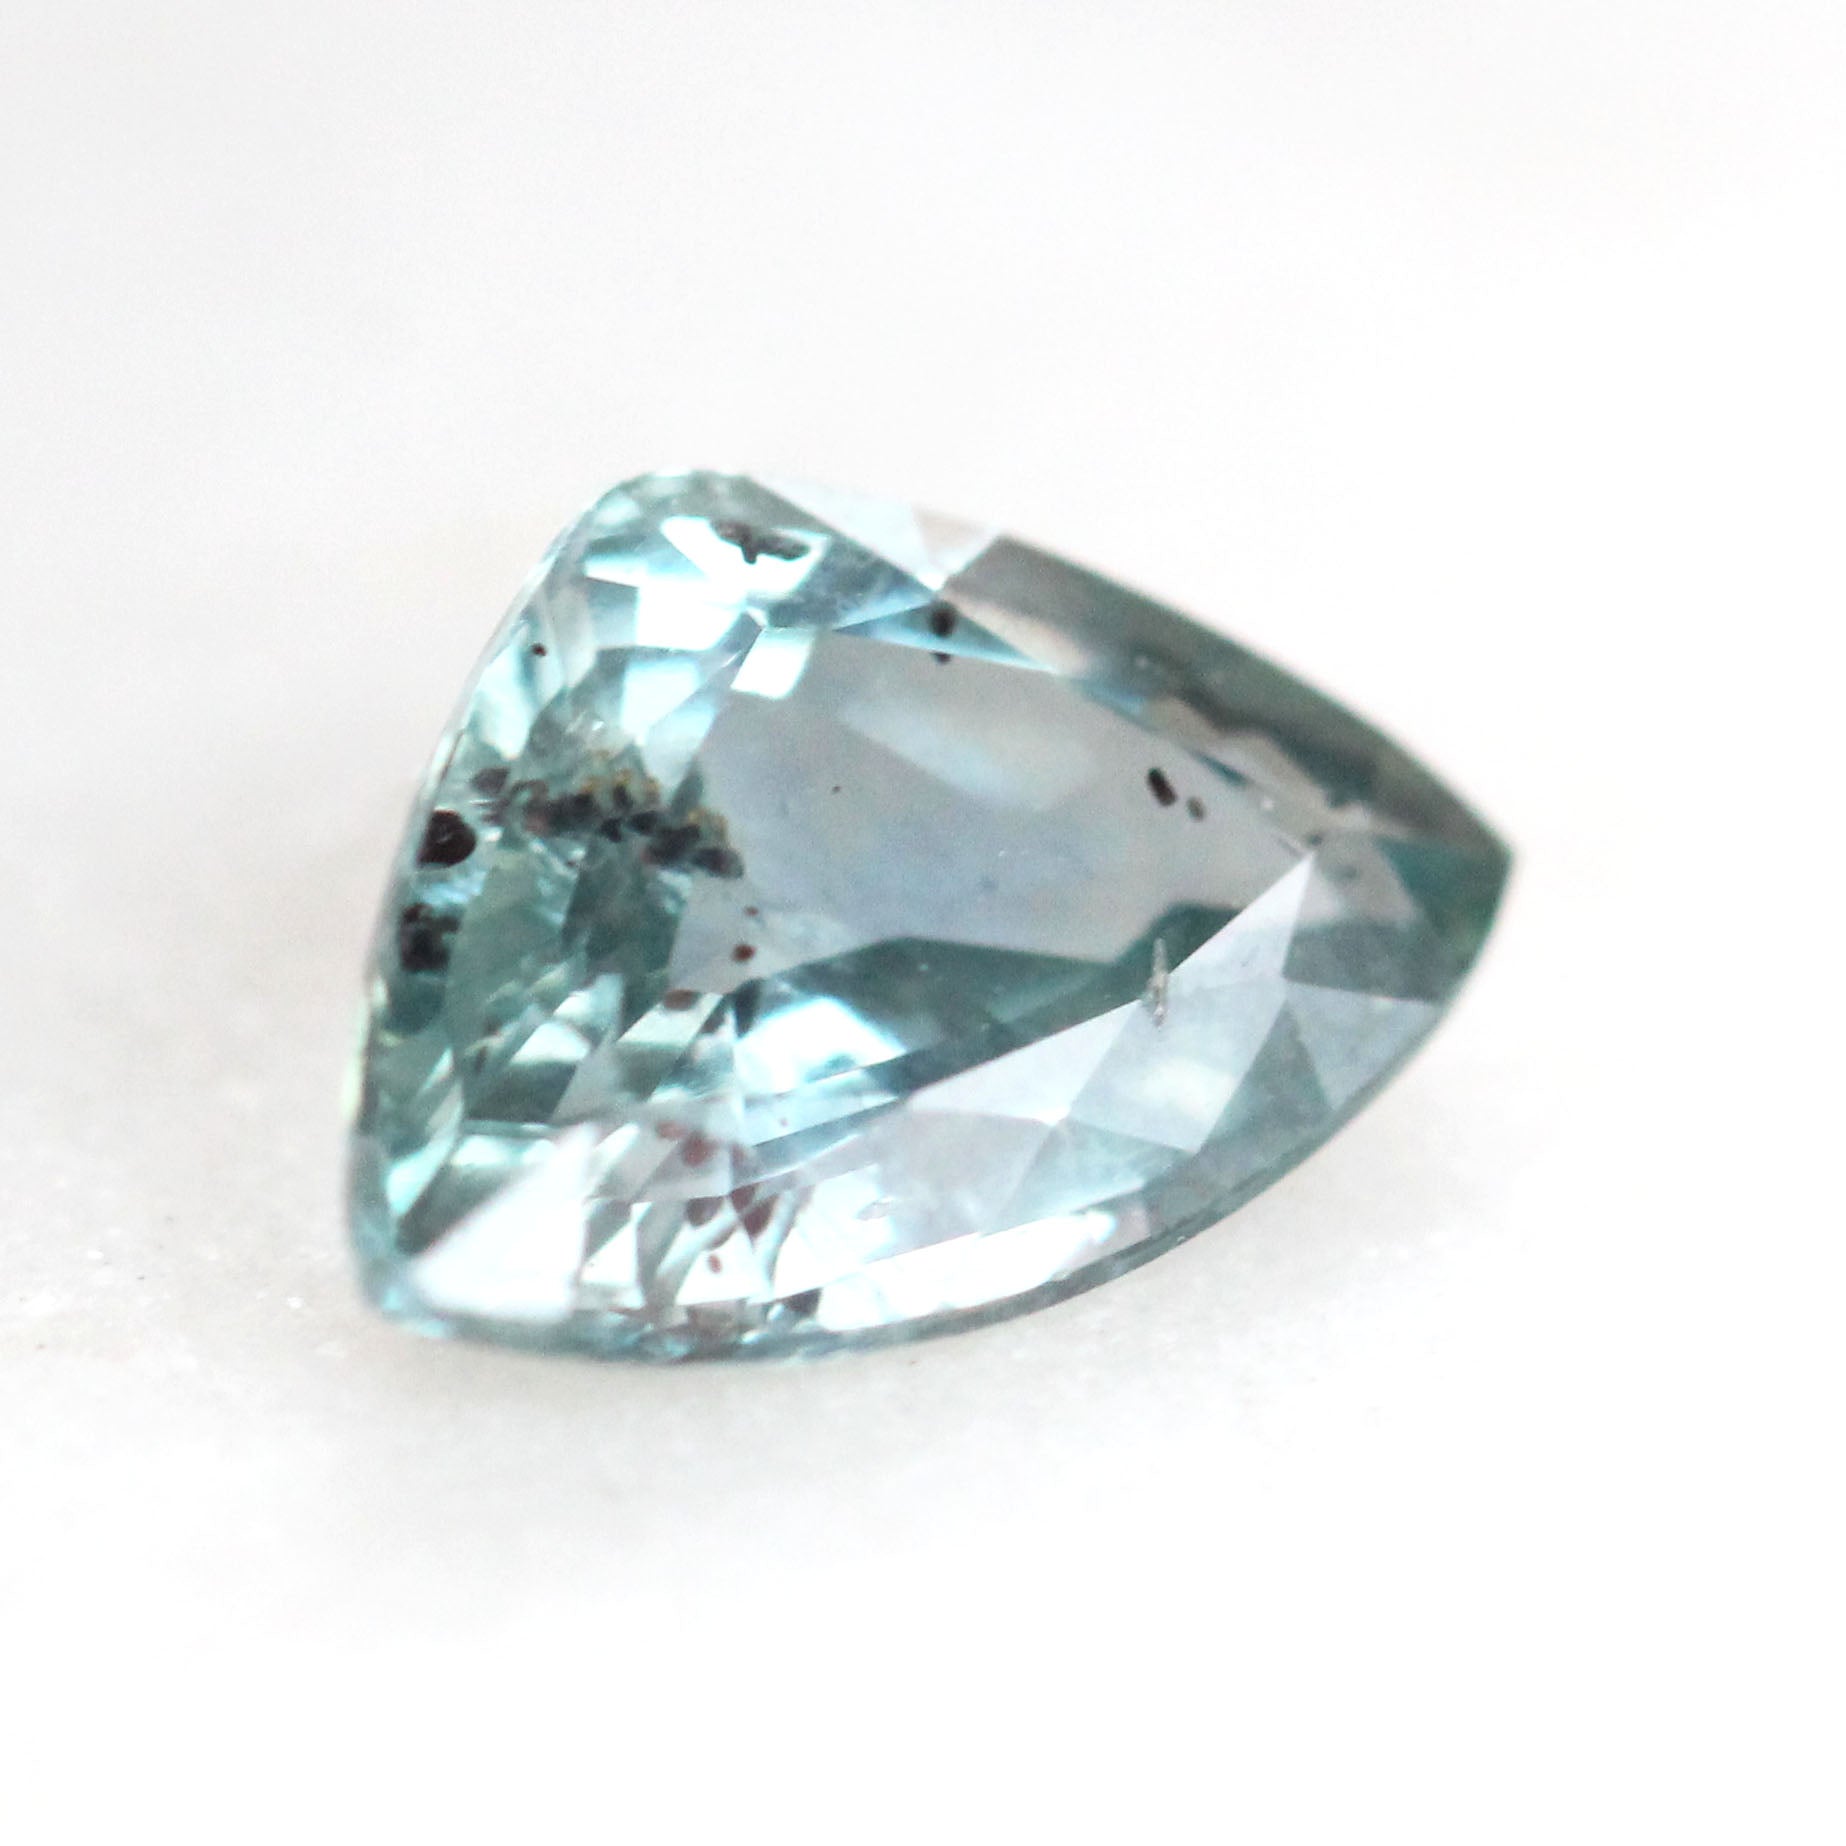 1.08 Carat Trillion Color Change Aqua Sapphire for Custom Work - Inventory Code TAS108 - Midwinter Co. Alternative Bridal Rings and Modern Fine Jewelry